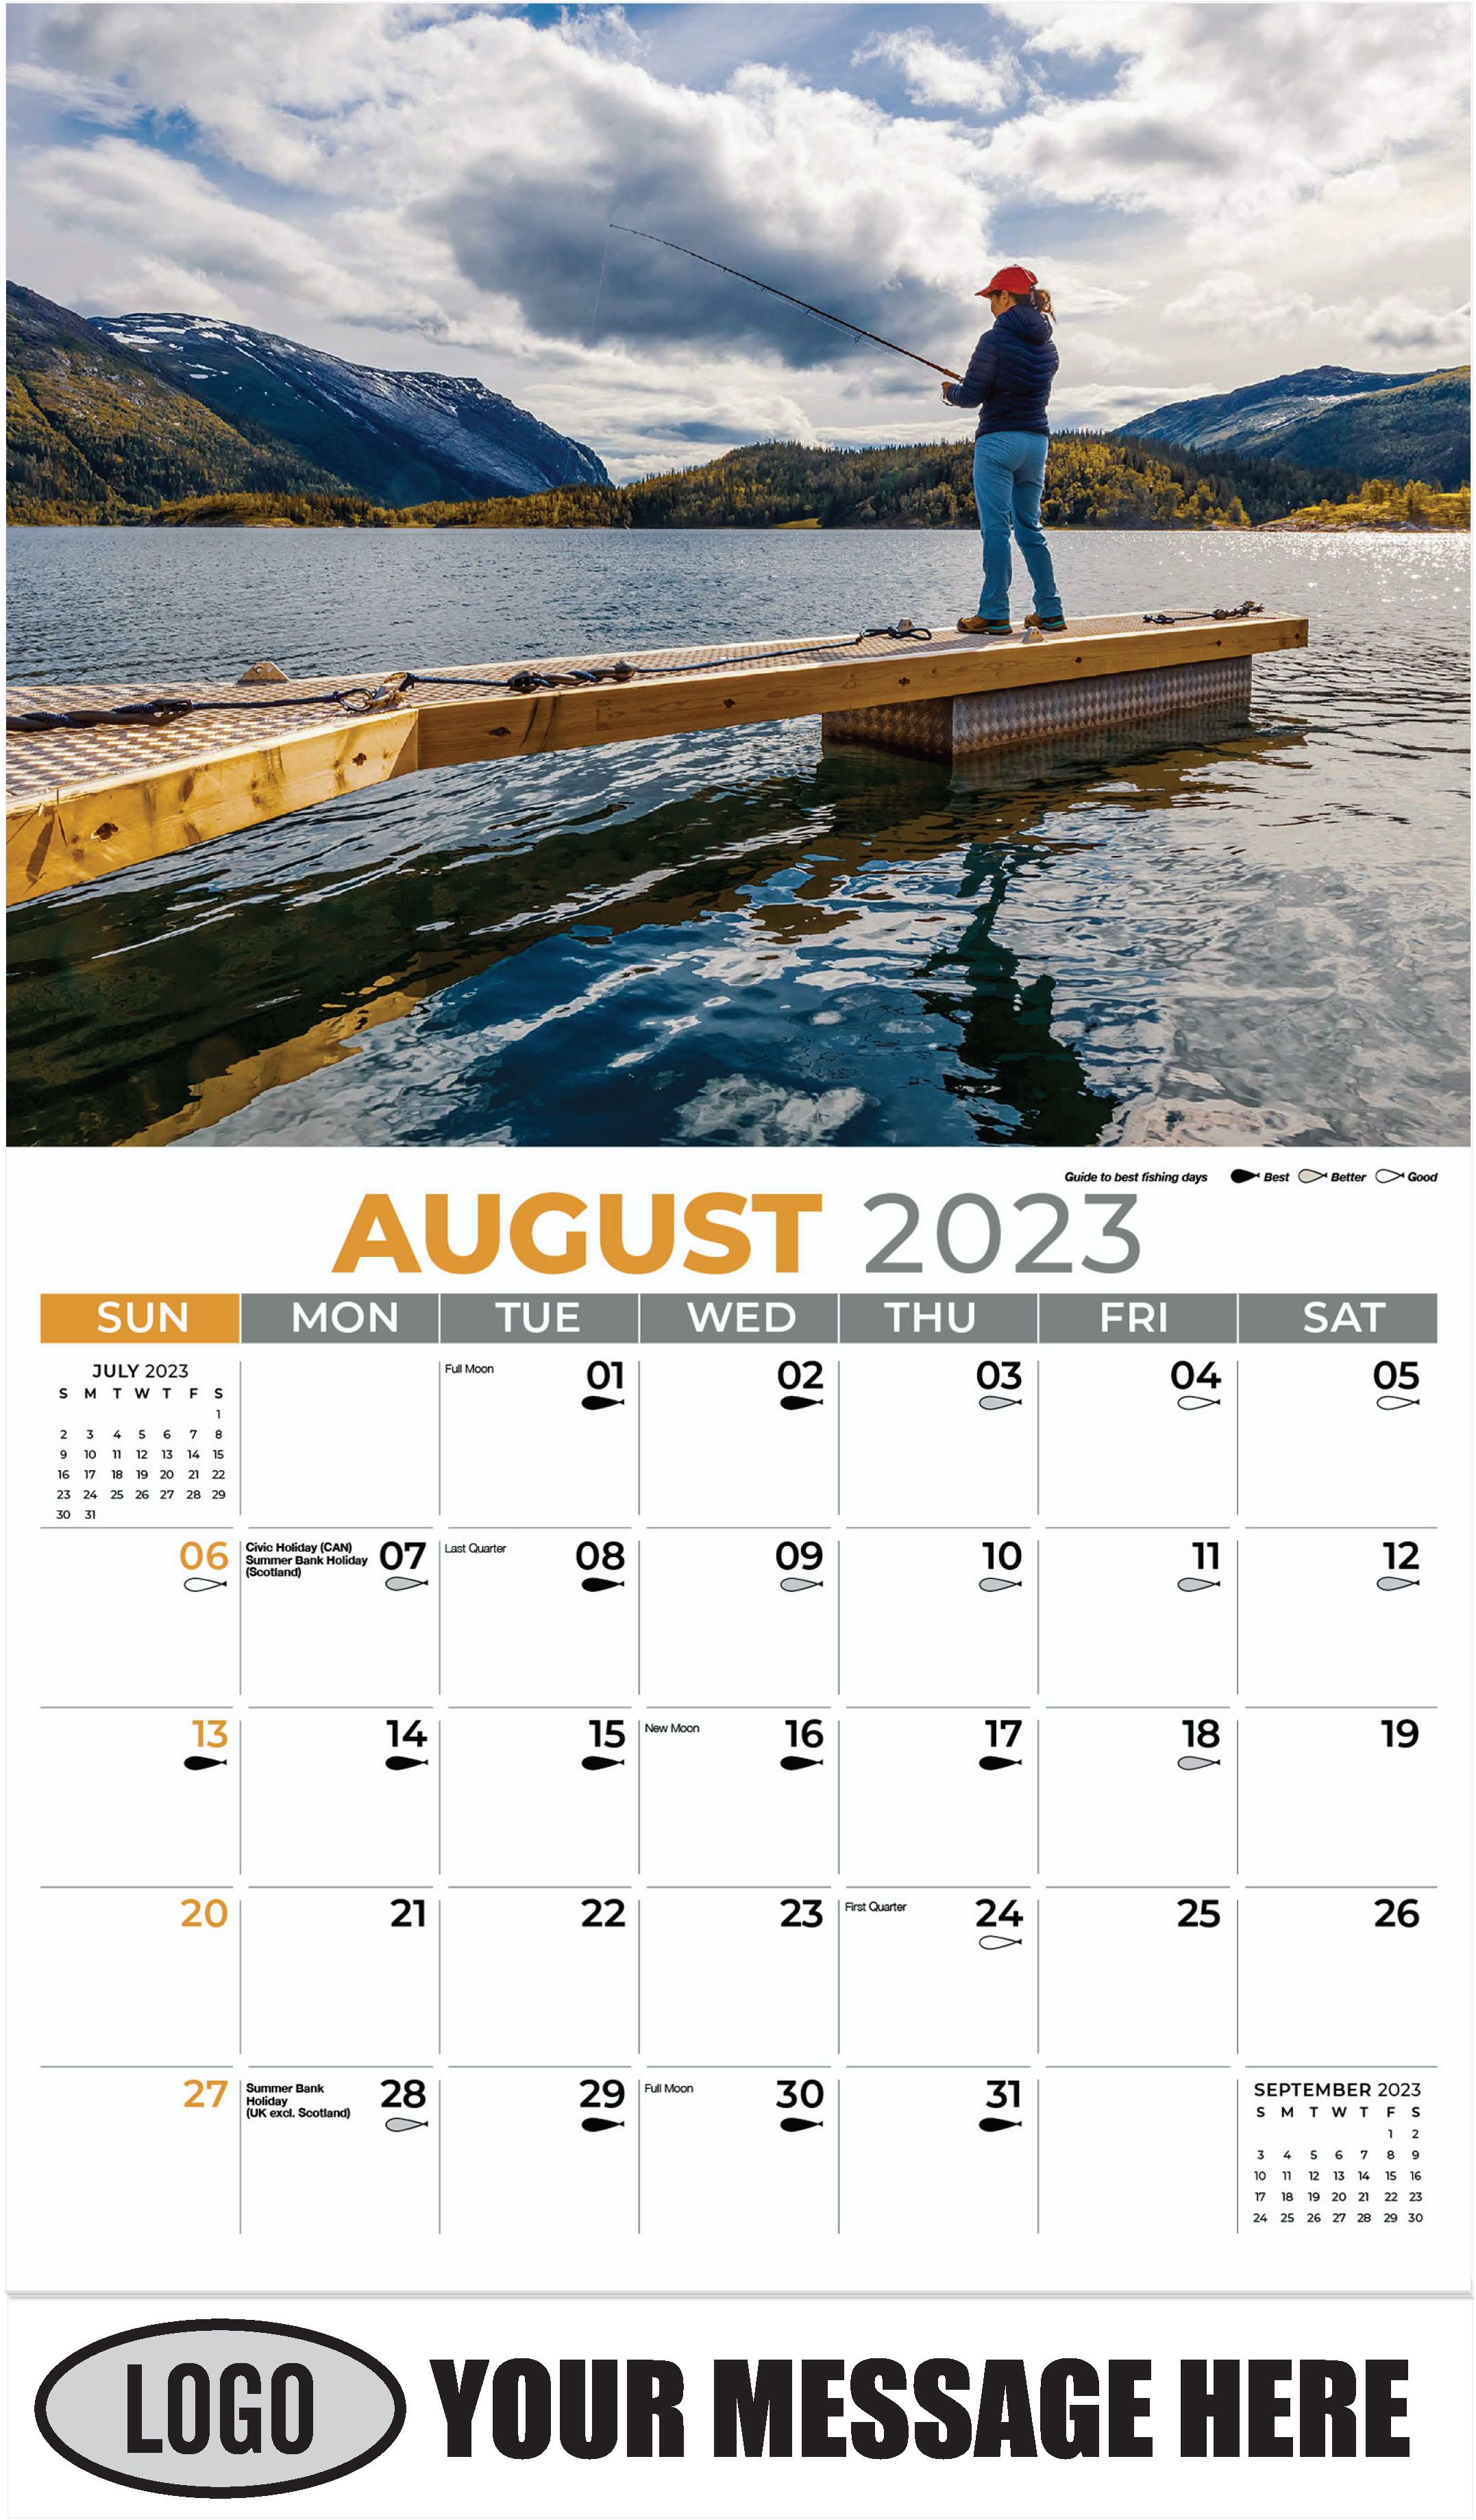 August - Fishing & Hunting 2023 Promotional Calendar